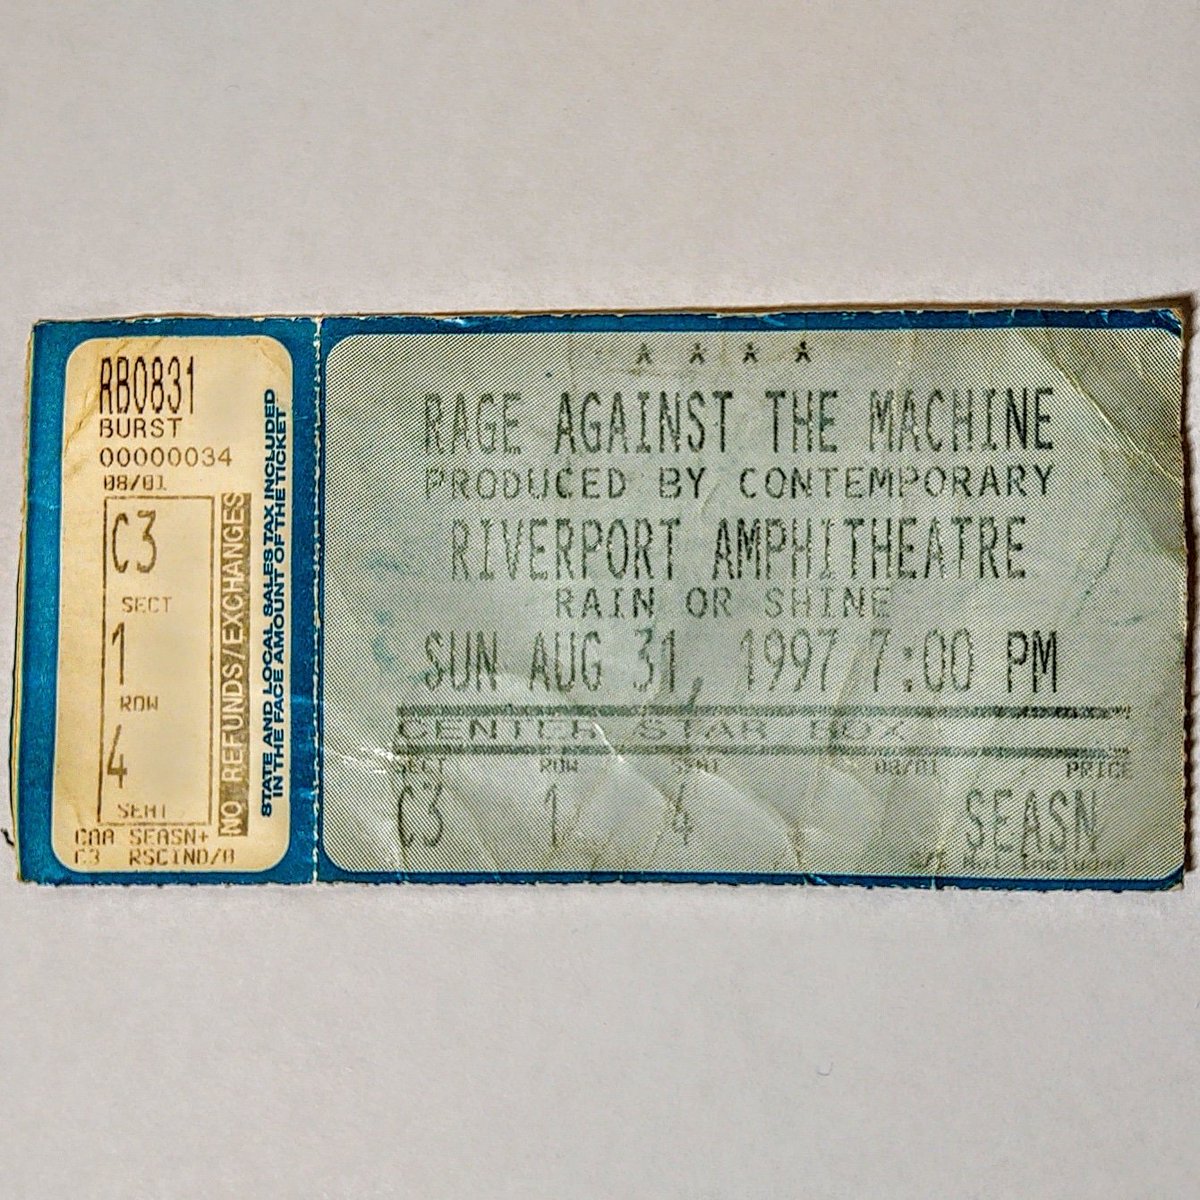 25 years ago today, Nate McClain attended the Rage Against The Machine concert at Riverport Amphitheater in St Louis MO on August 31, 1997. natemcclain.com #natemcclain #1997 #ratm #rageagainstthemachine #concert #ticket #riverport #stlouis #stl #mo #missouri #90s